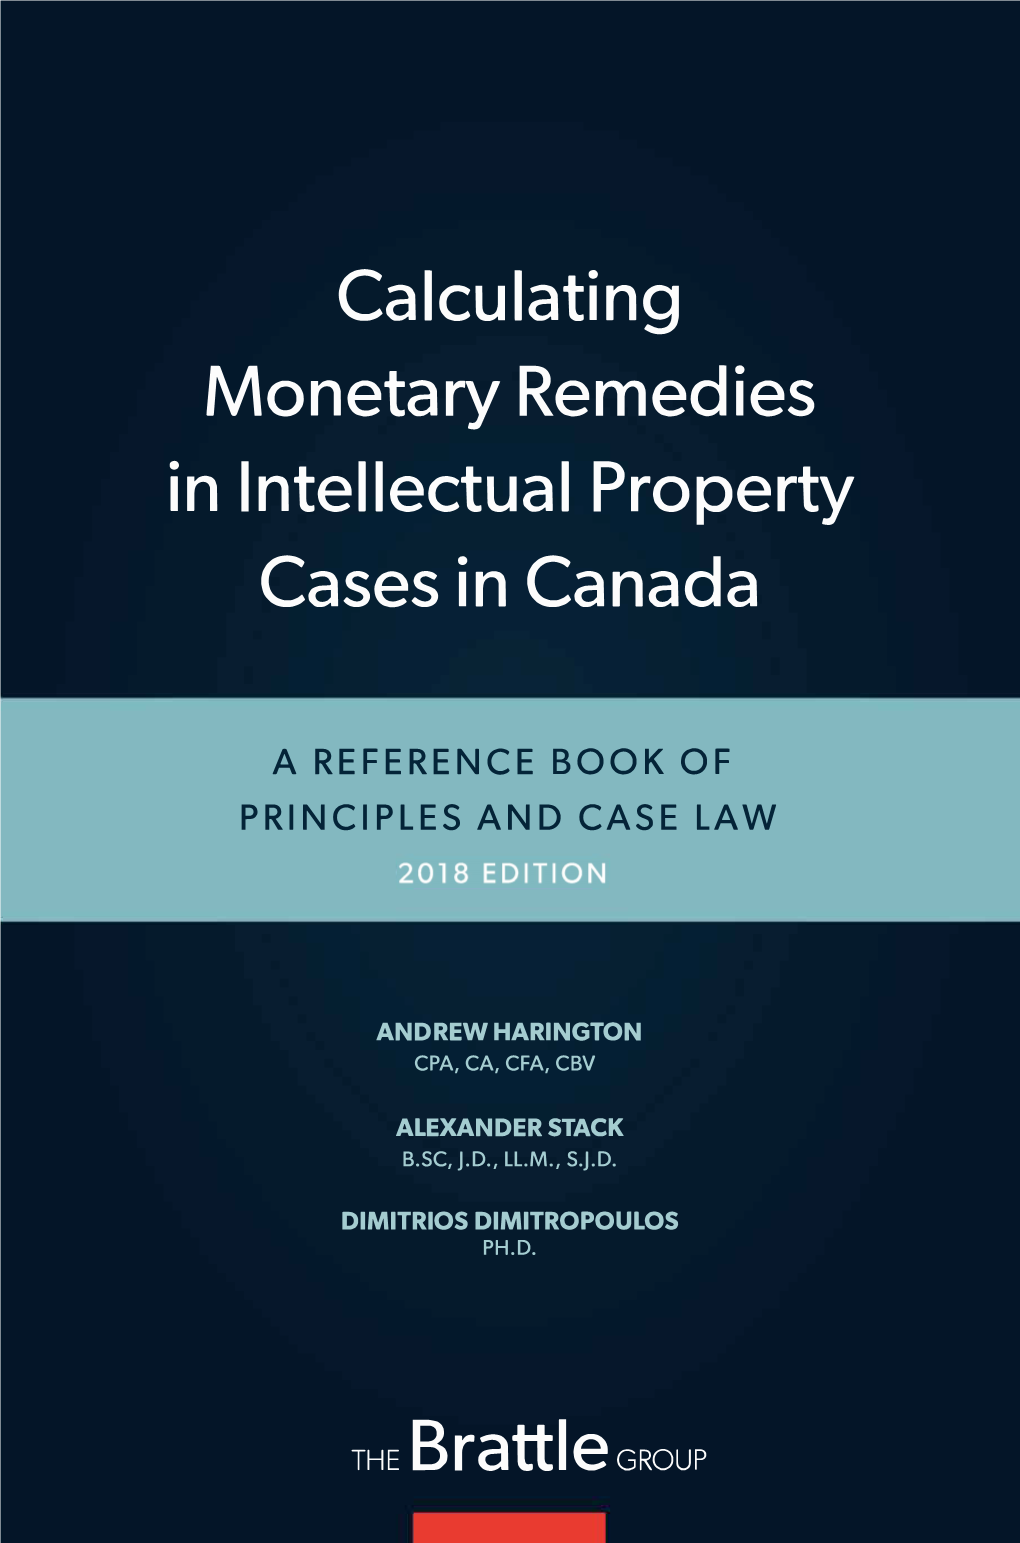 Calculating Monetary Remedies in Intellectual Property Cases in Canada